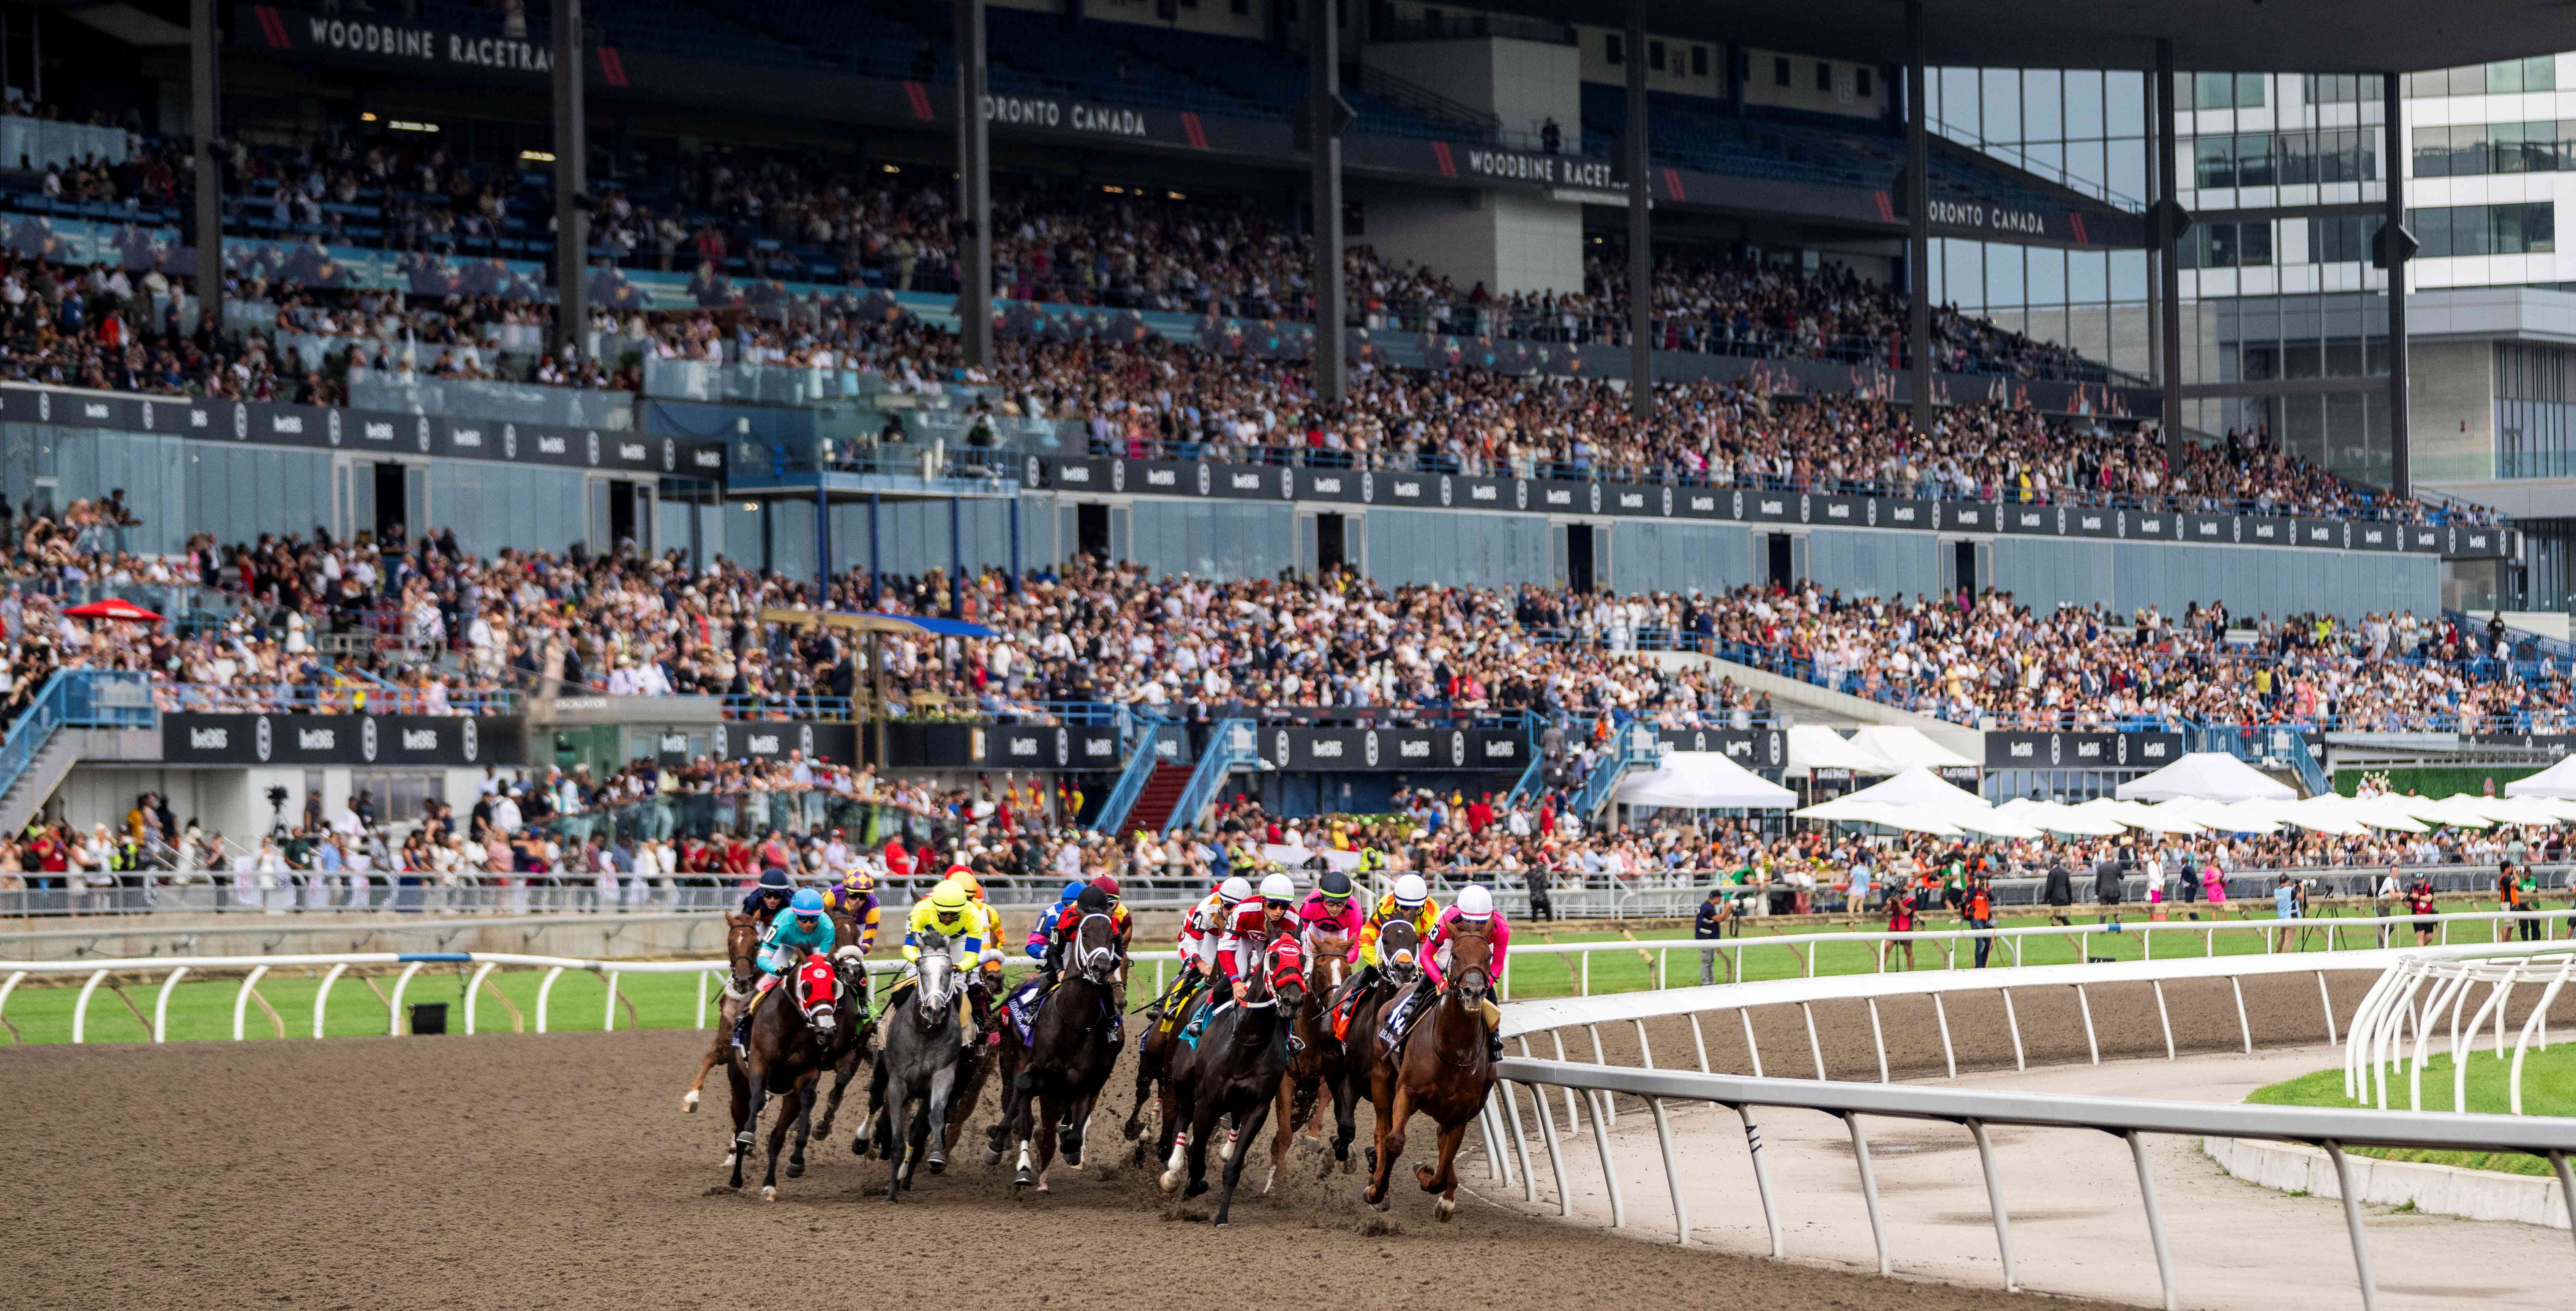 The running of The 164th King's Plate in 2023 at Woodbine (Michael Burns Photo)